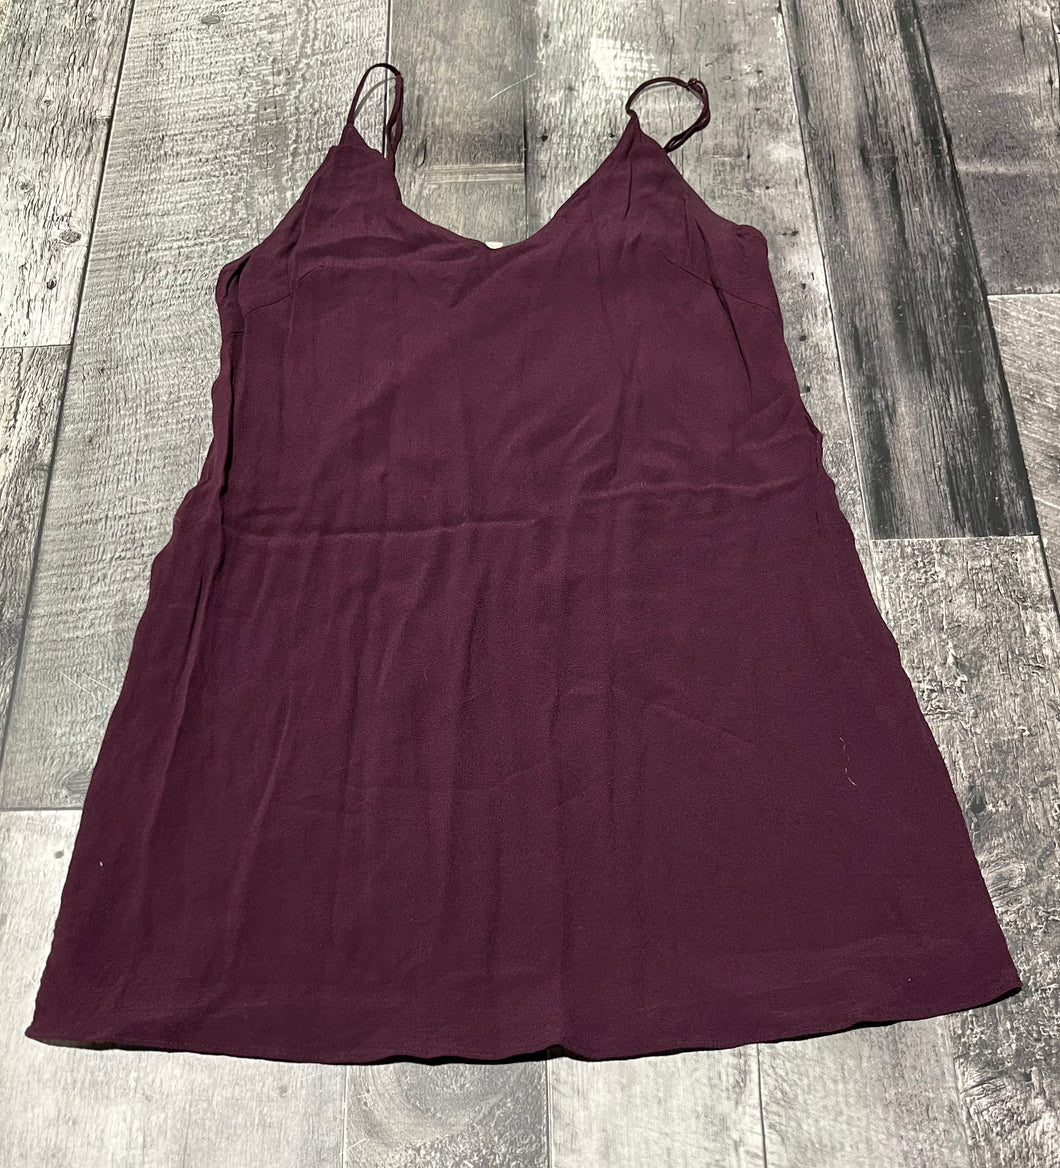 Wilfred Free burgundy tank top - Here size S